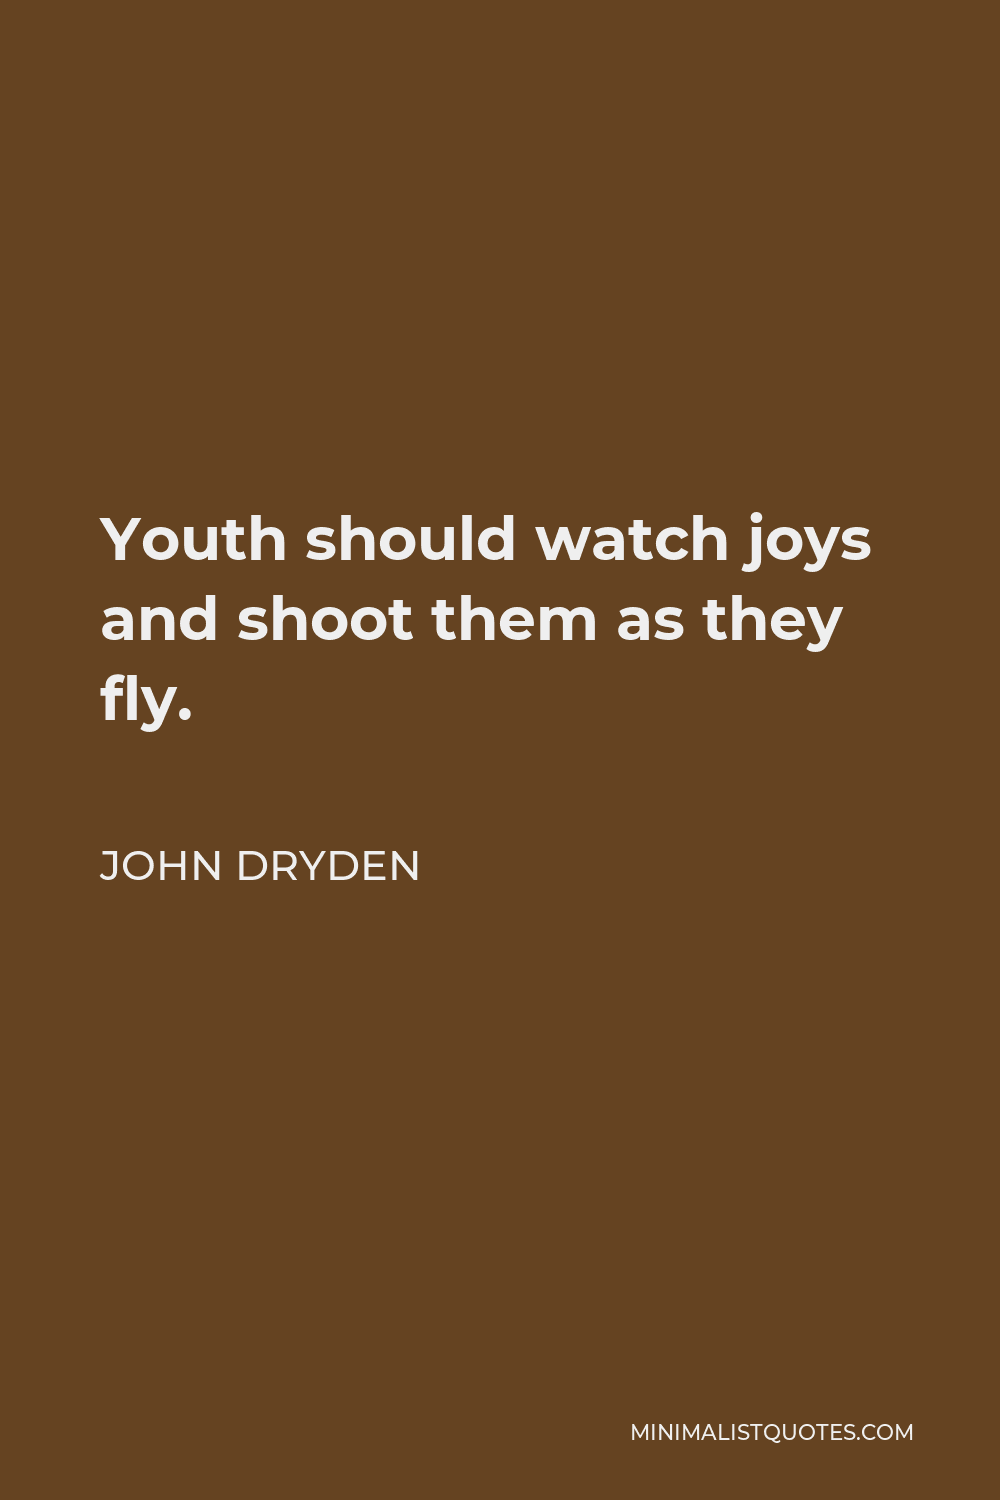 John Dryden Quote - Youth should watch joys and shoot them as they fly.